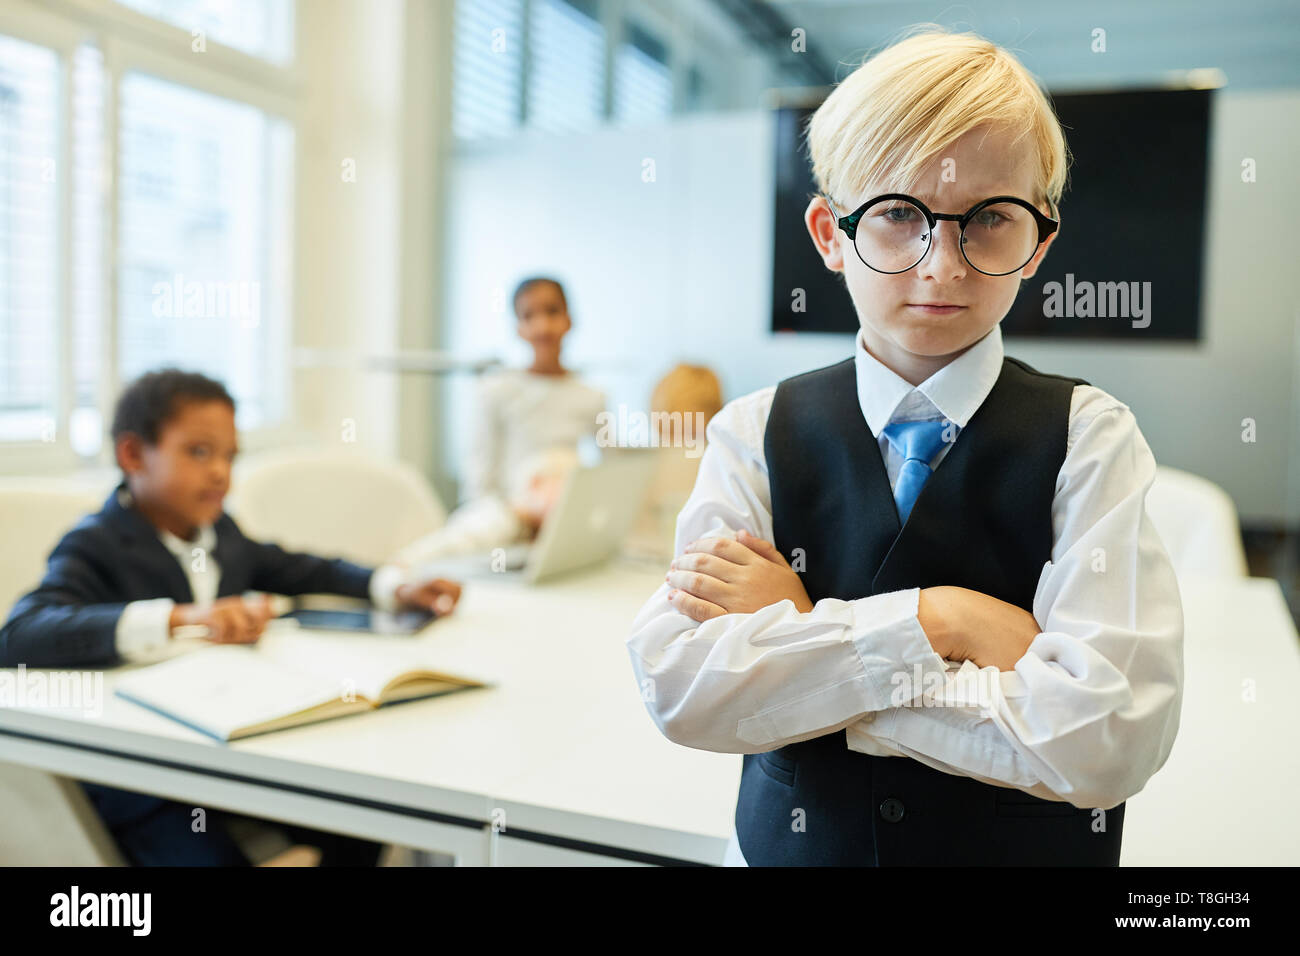 Boy as a critical manager or entrepreneur with arms crossed in a meeting Stock Photo